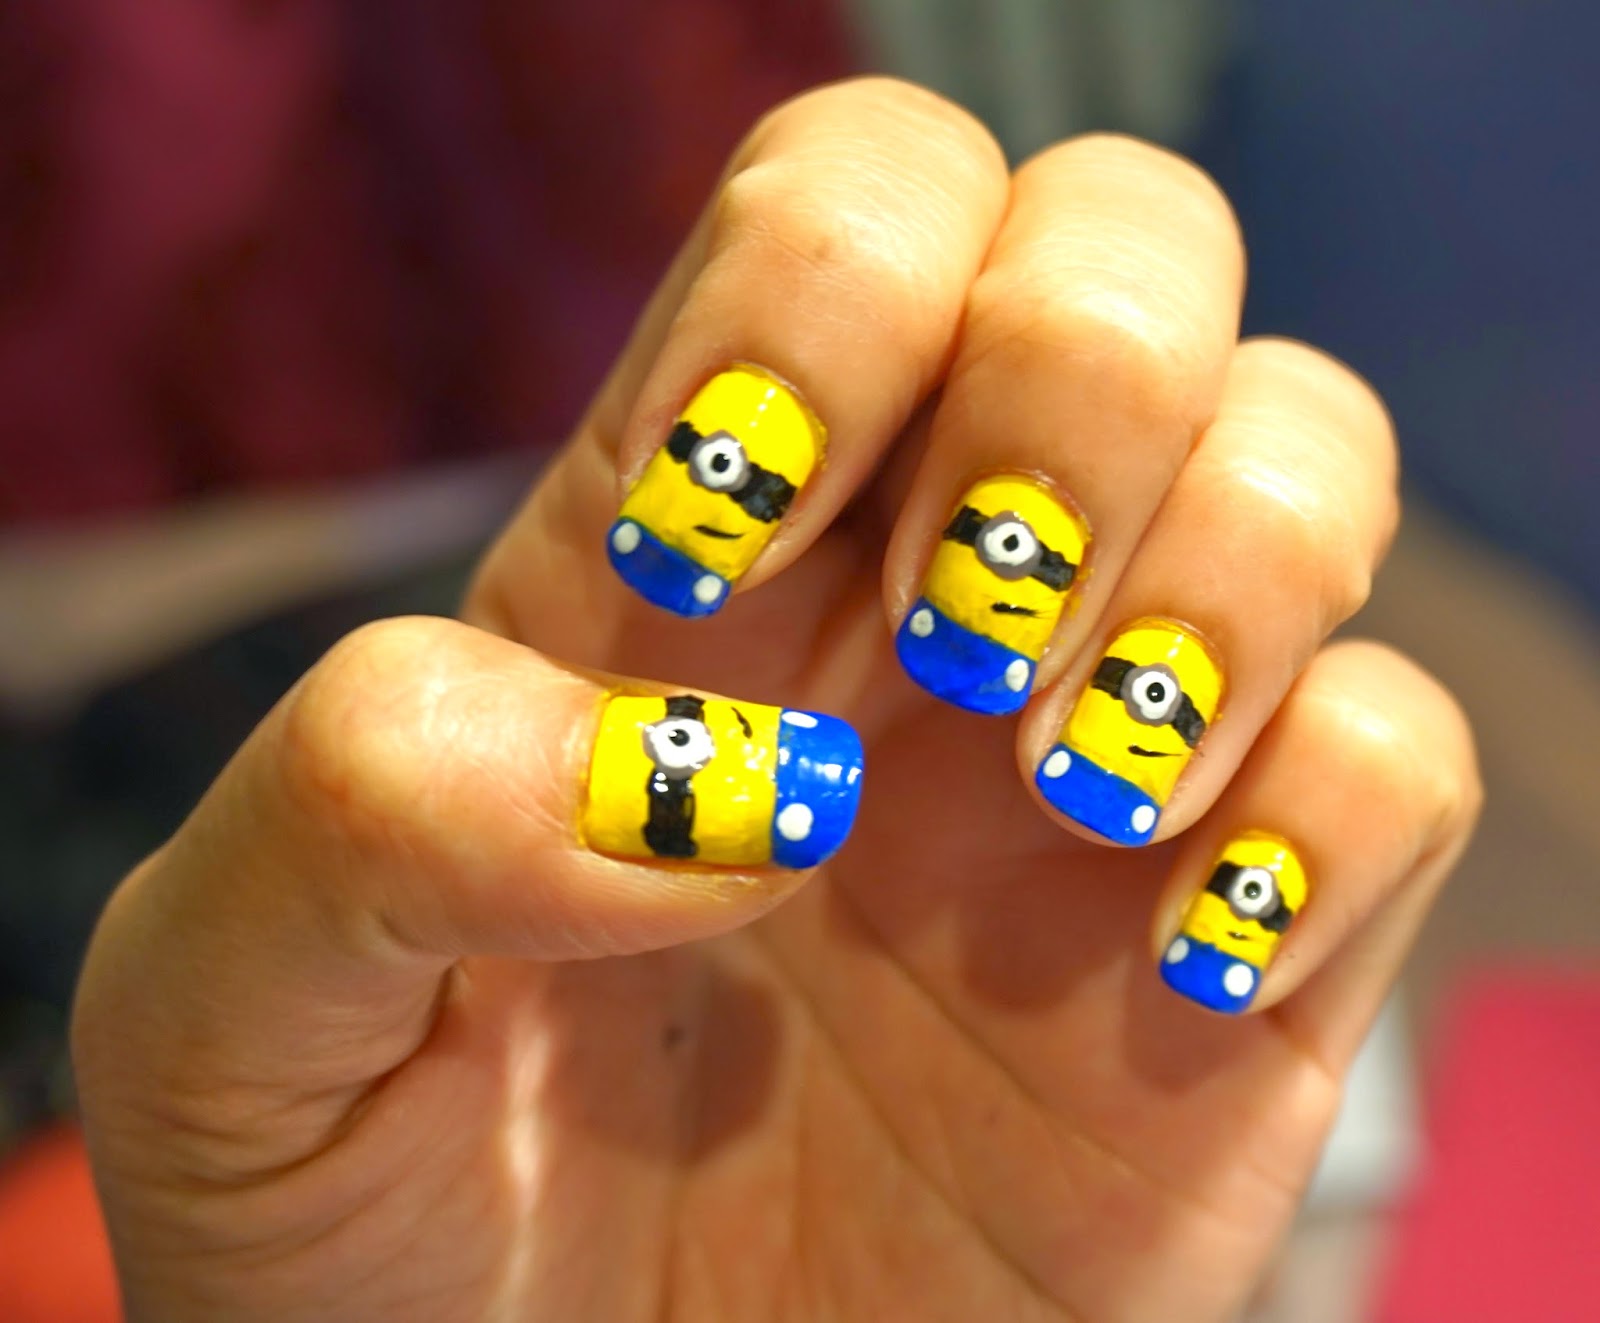 10. "Minion Nail Art with 3D Accents" by cutepolish - wide 10